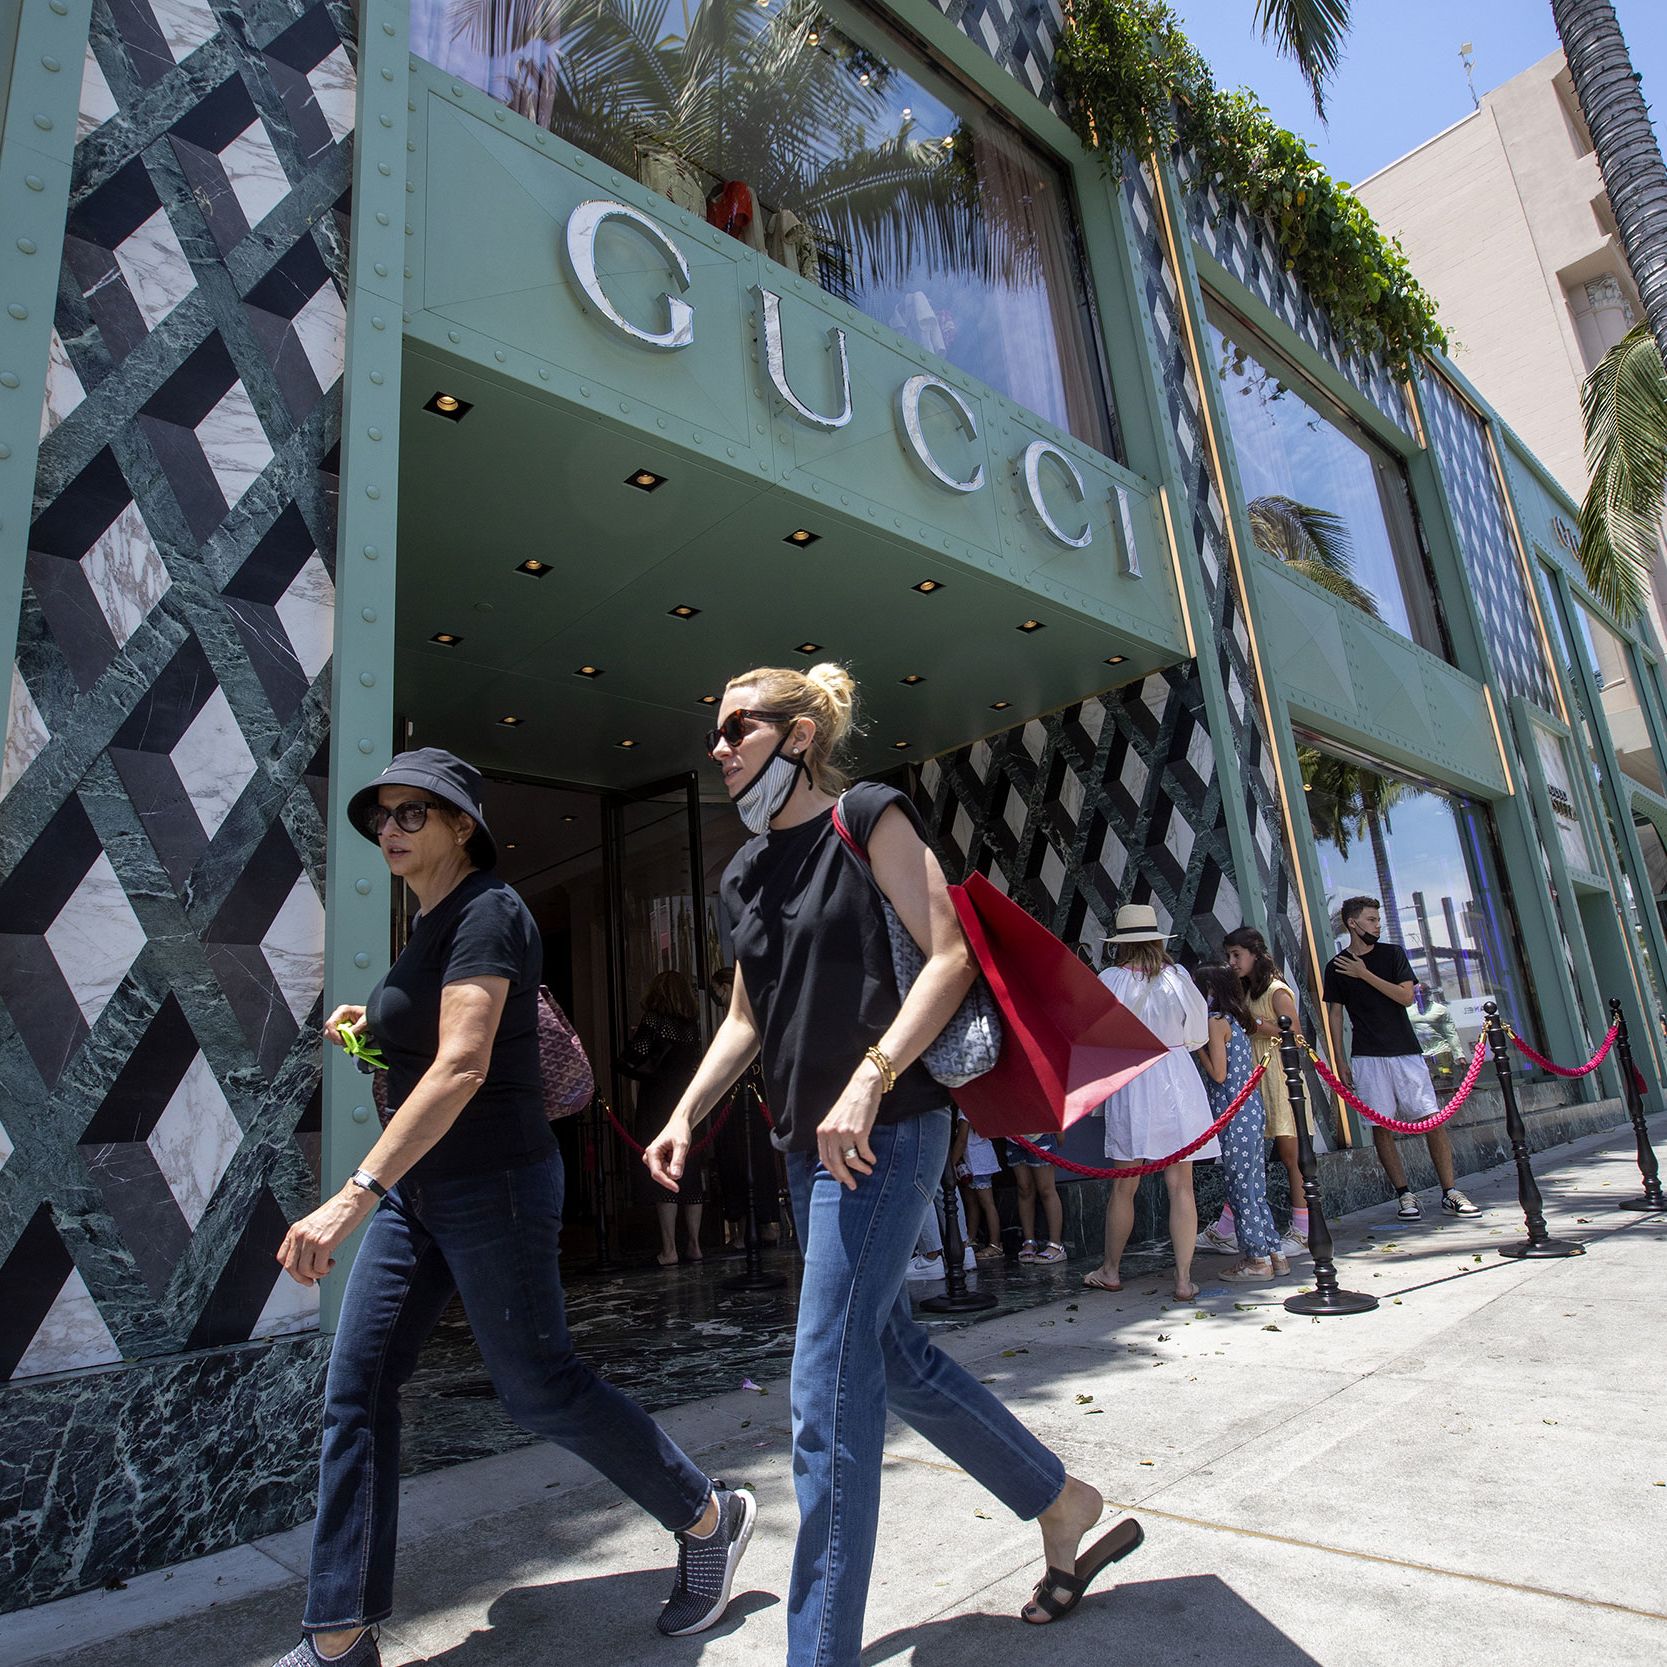 You will soon be able to use Bitcoin to buy Gucci | CNN Business